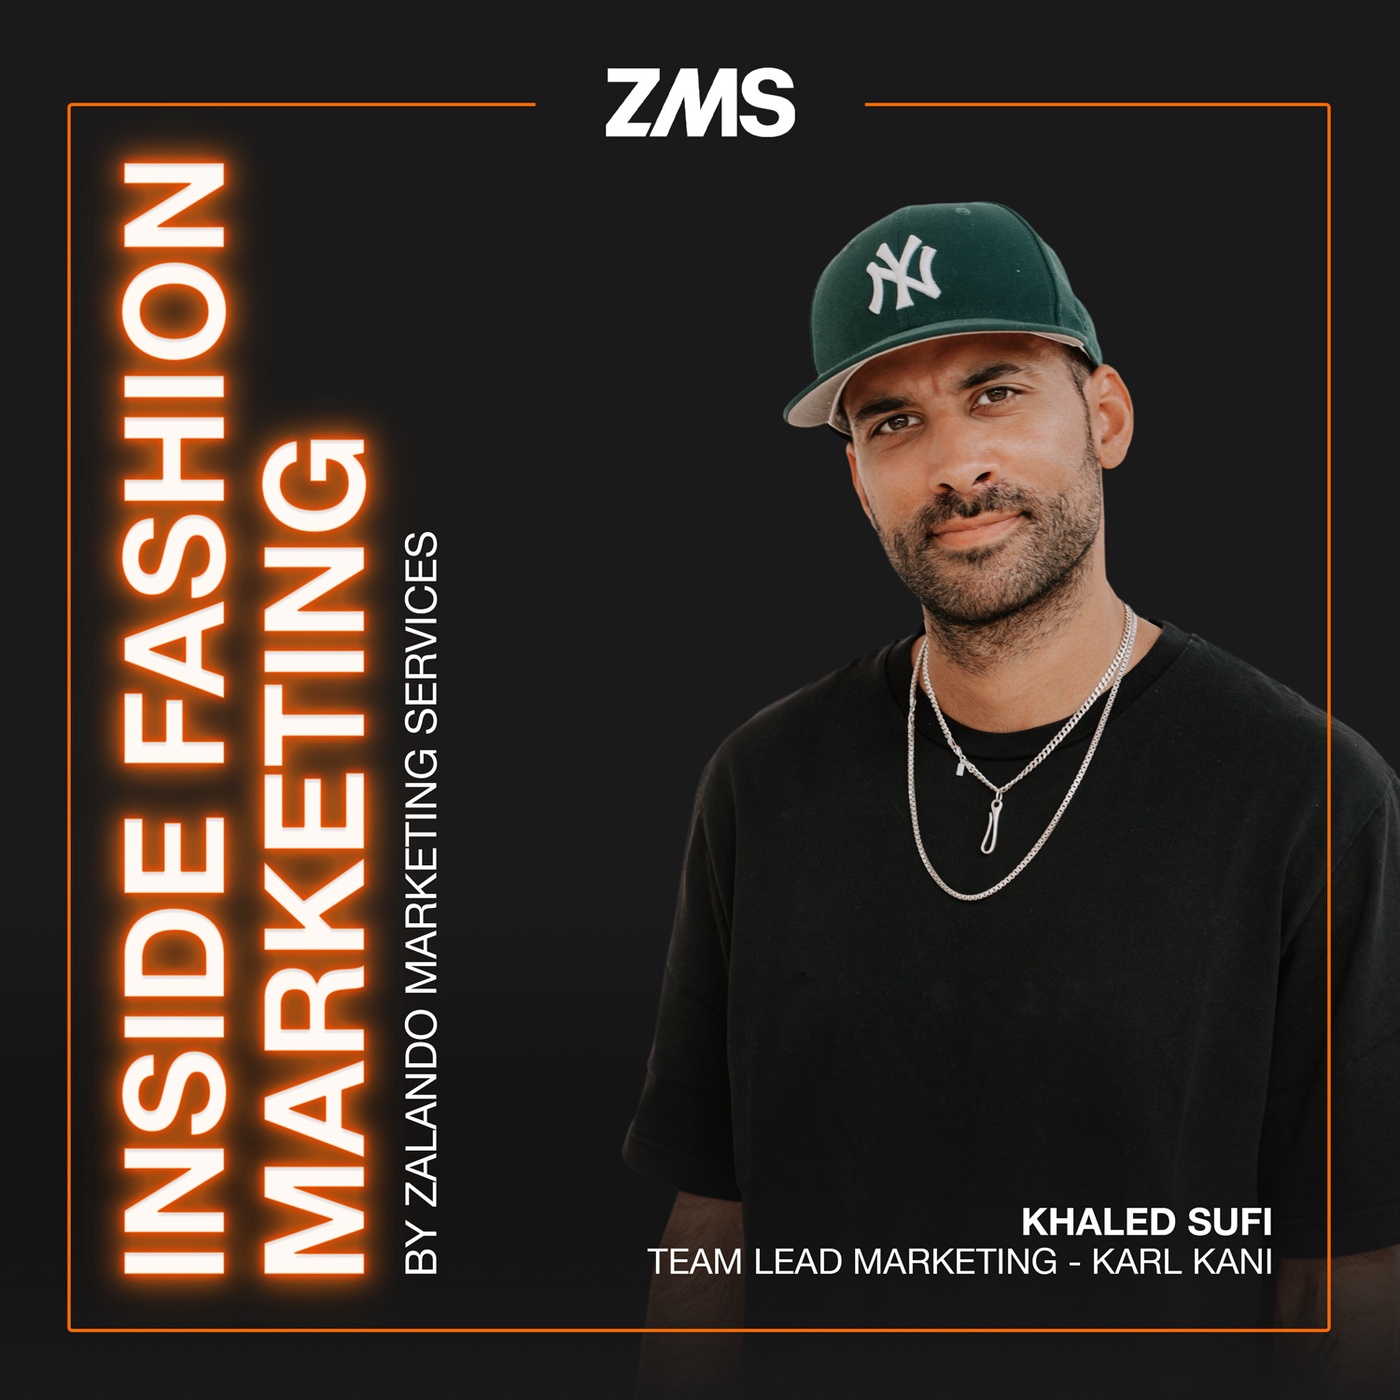 #9 Karl Kani: Creating hype around collections with flawless branding